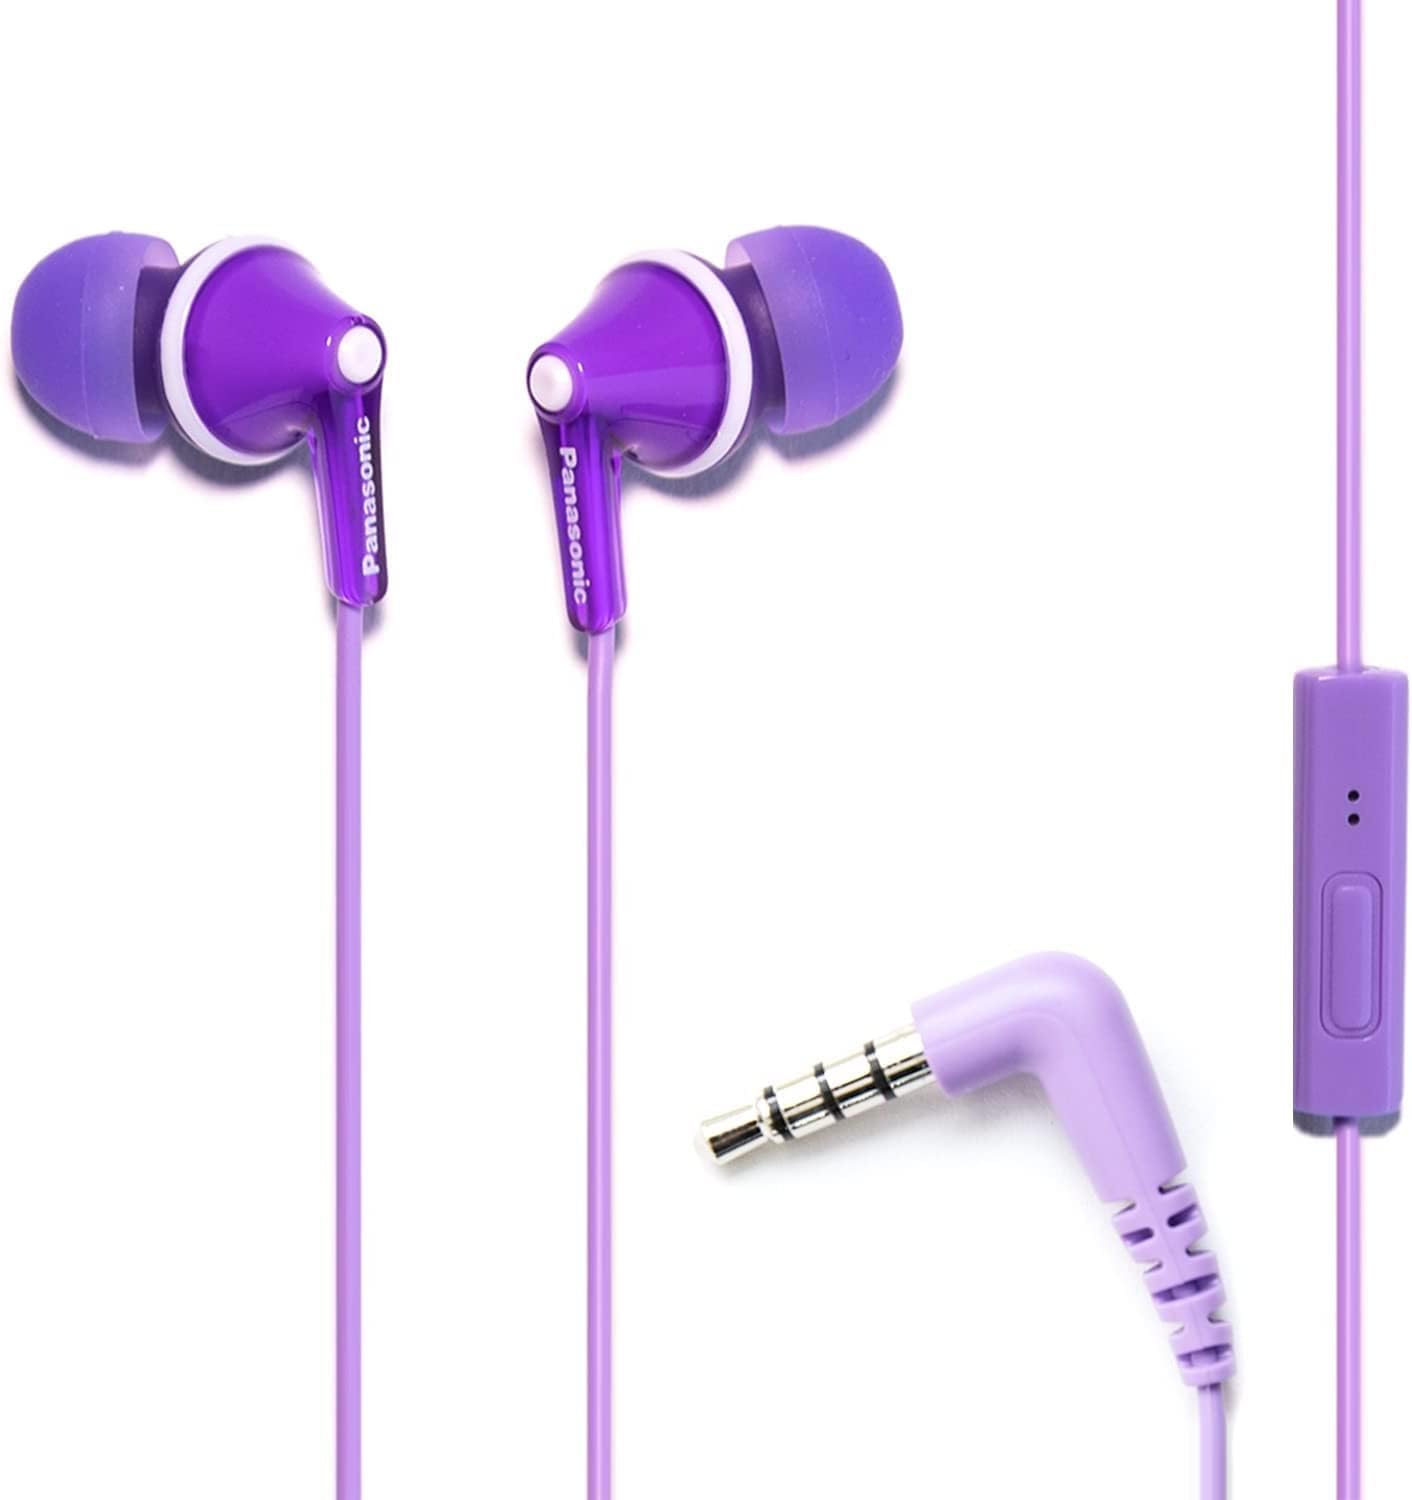 Violet wired earbuds made by Panasonic.